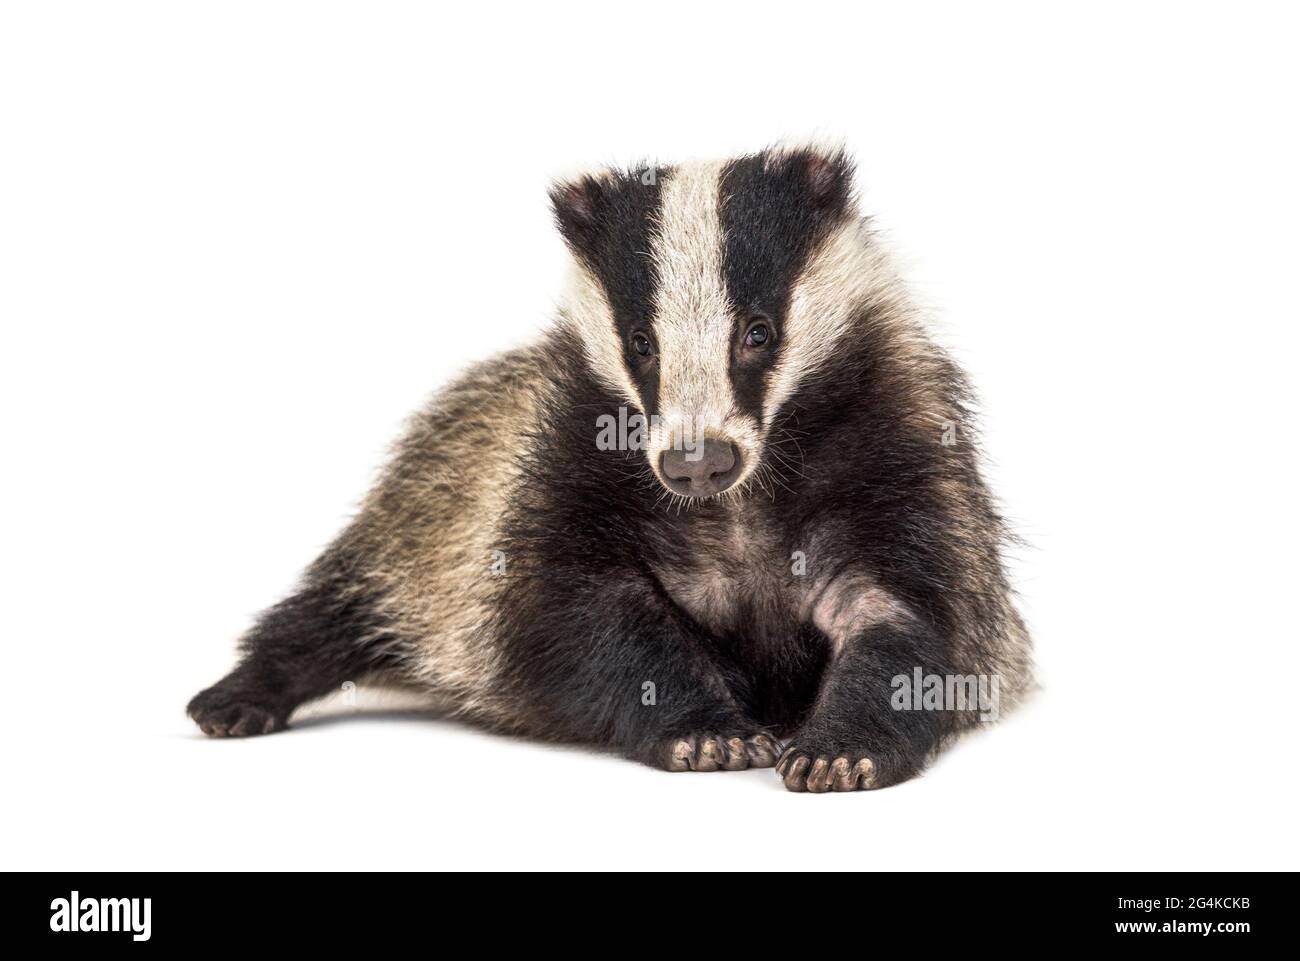 European badger, six months old, looking at camera, isolated Stock Photo